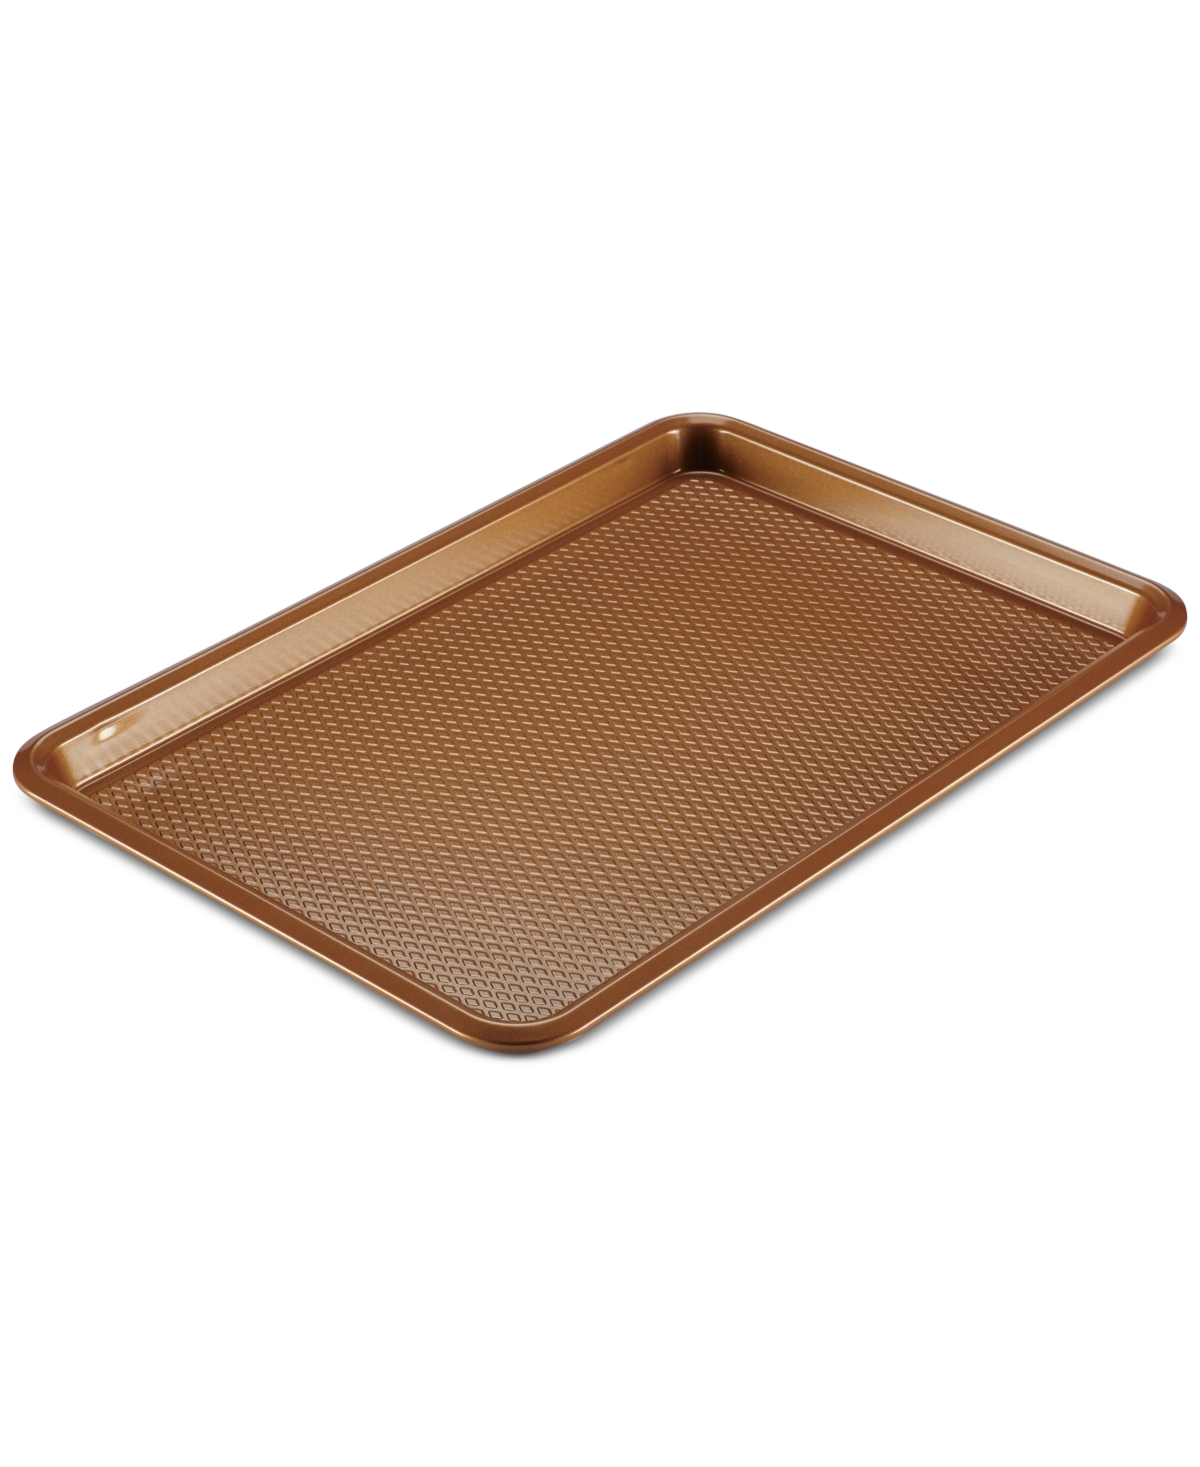 Ayesha Curry Home Collection Cookie Pan